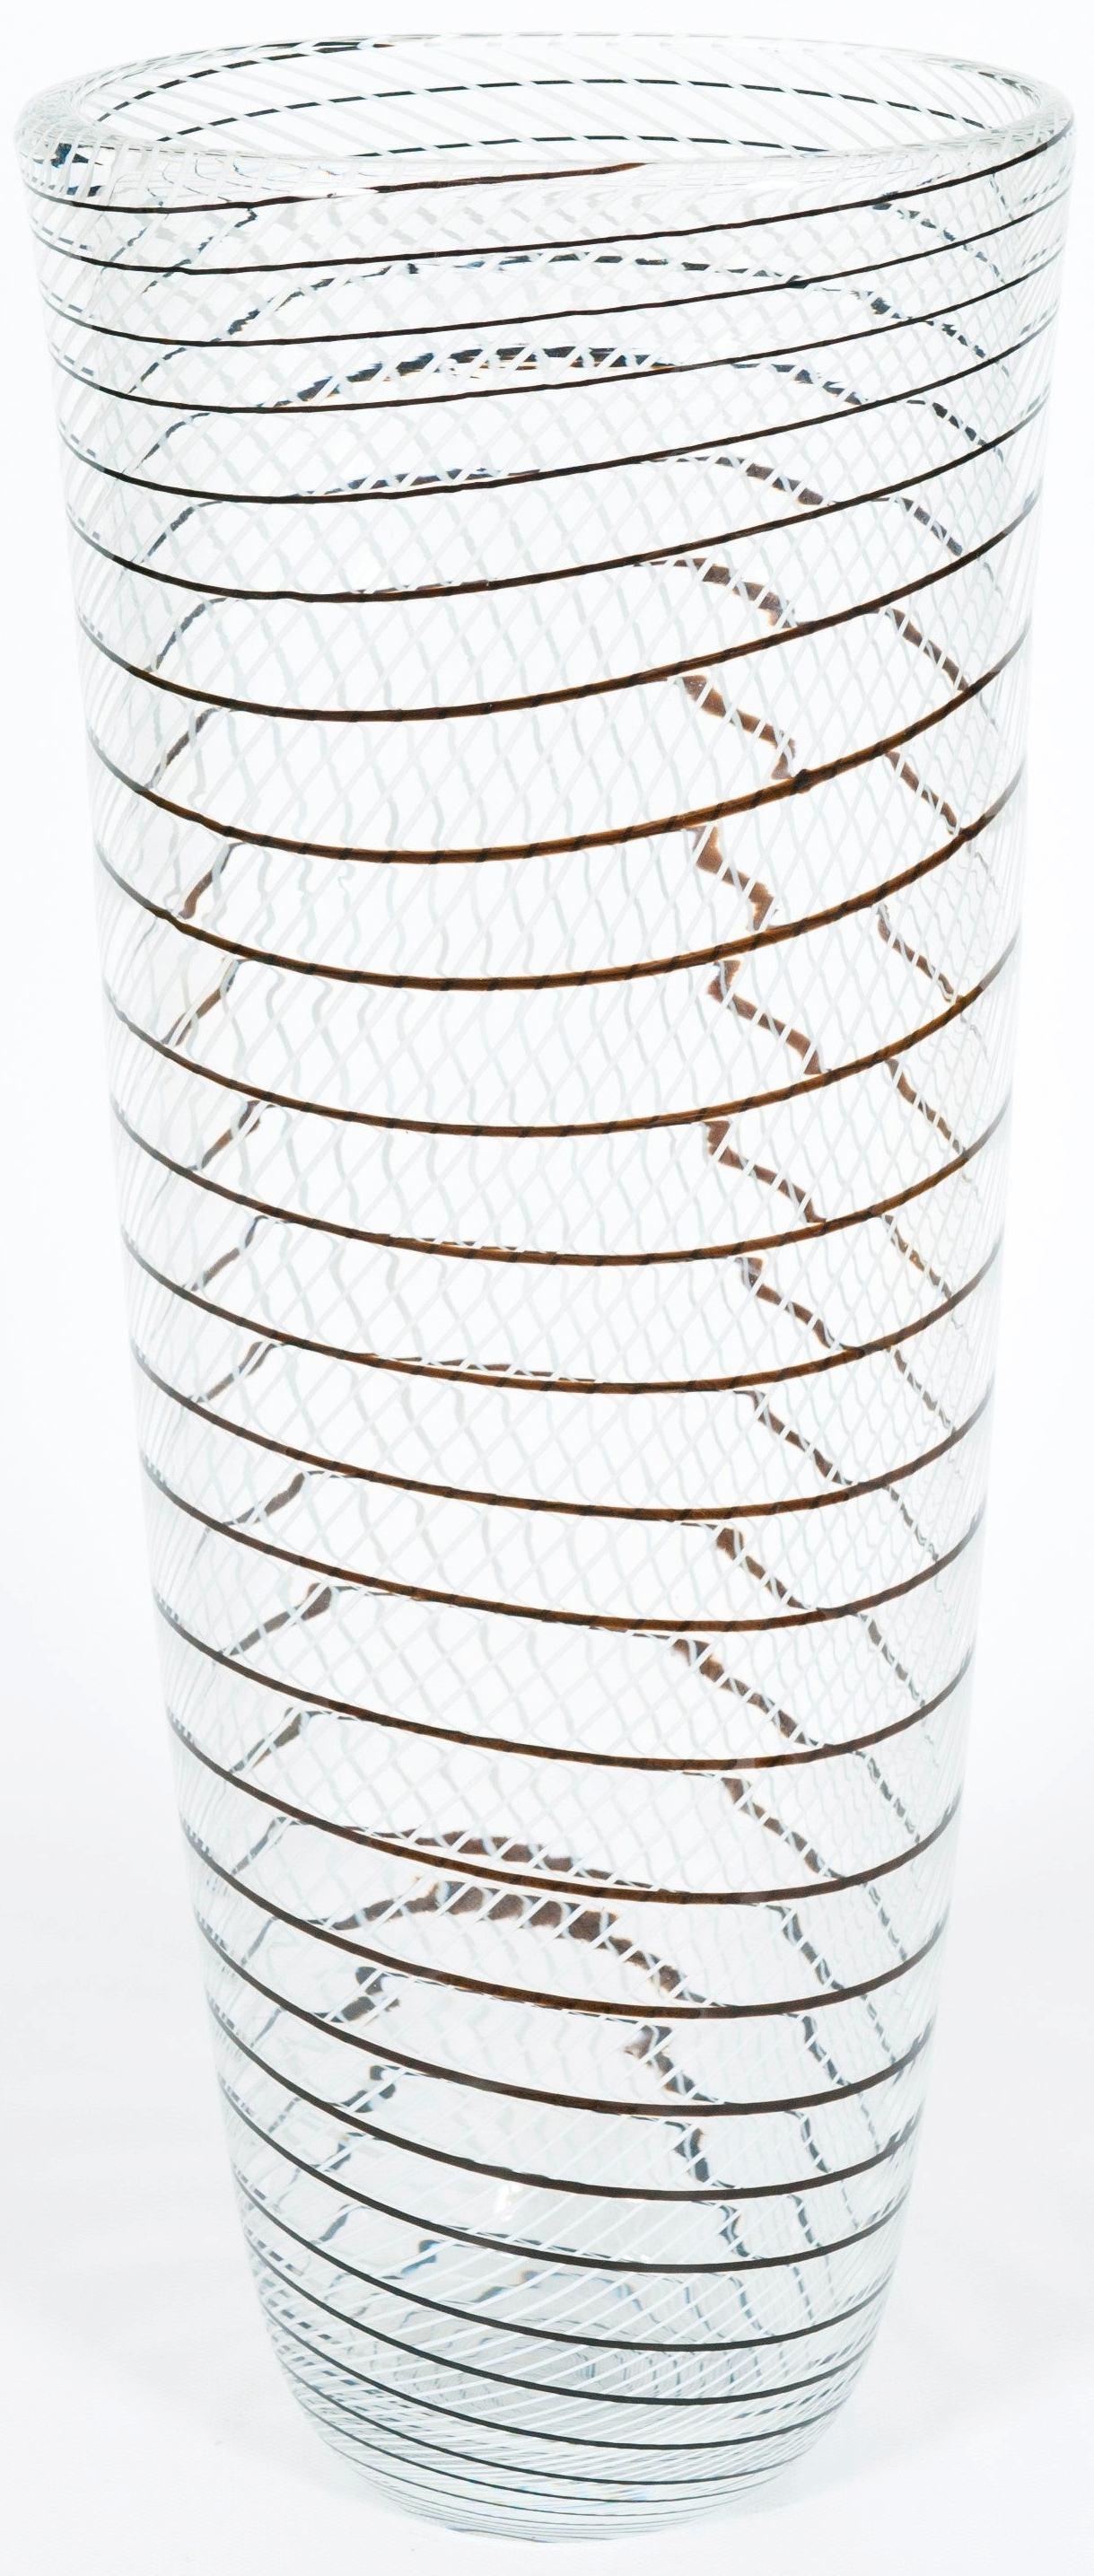 Transparent Murano glass artistic vase with black and white patterns, 1990s.
This artistic vase is a unique and special object, perfect for a refined Murano glass lover. Its shape is oval, and developed in in height which is 23.6